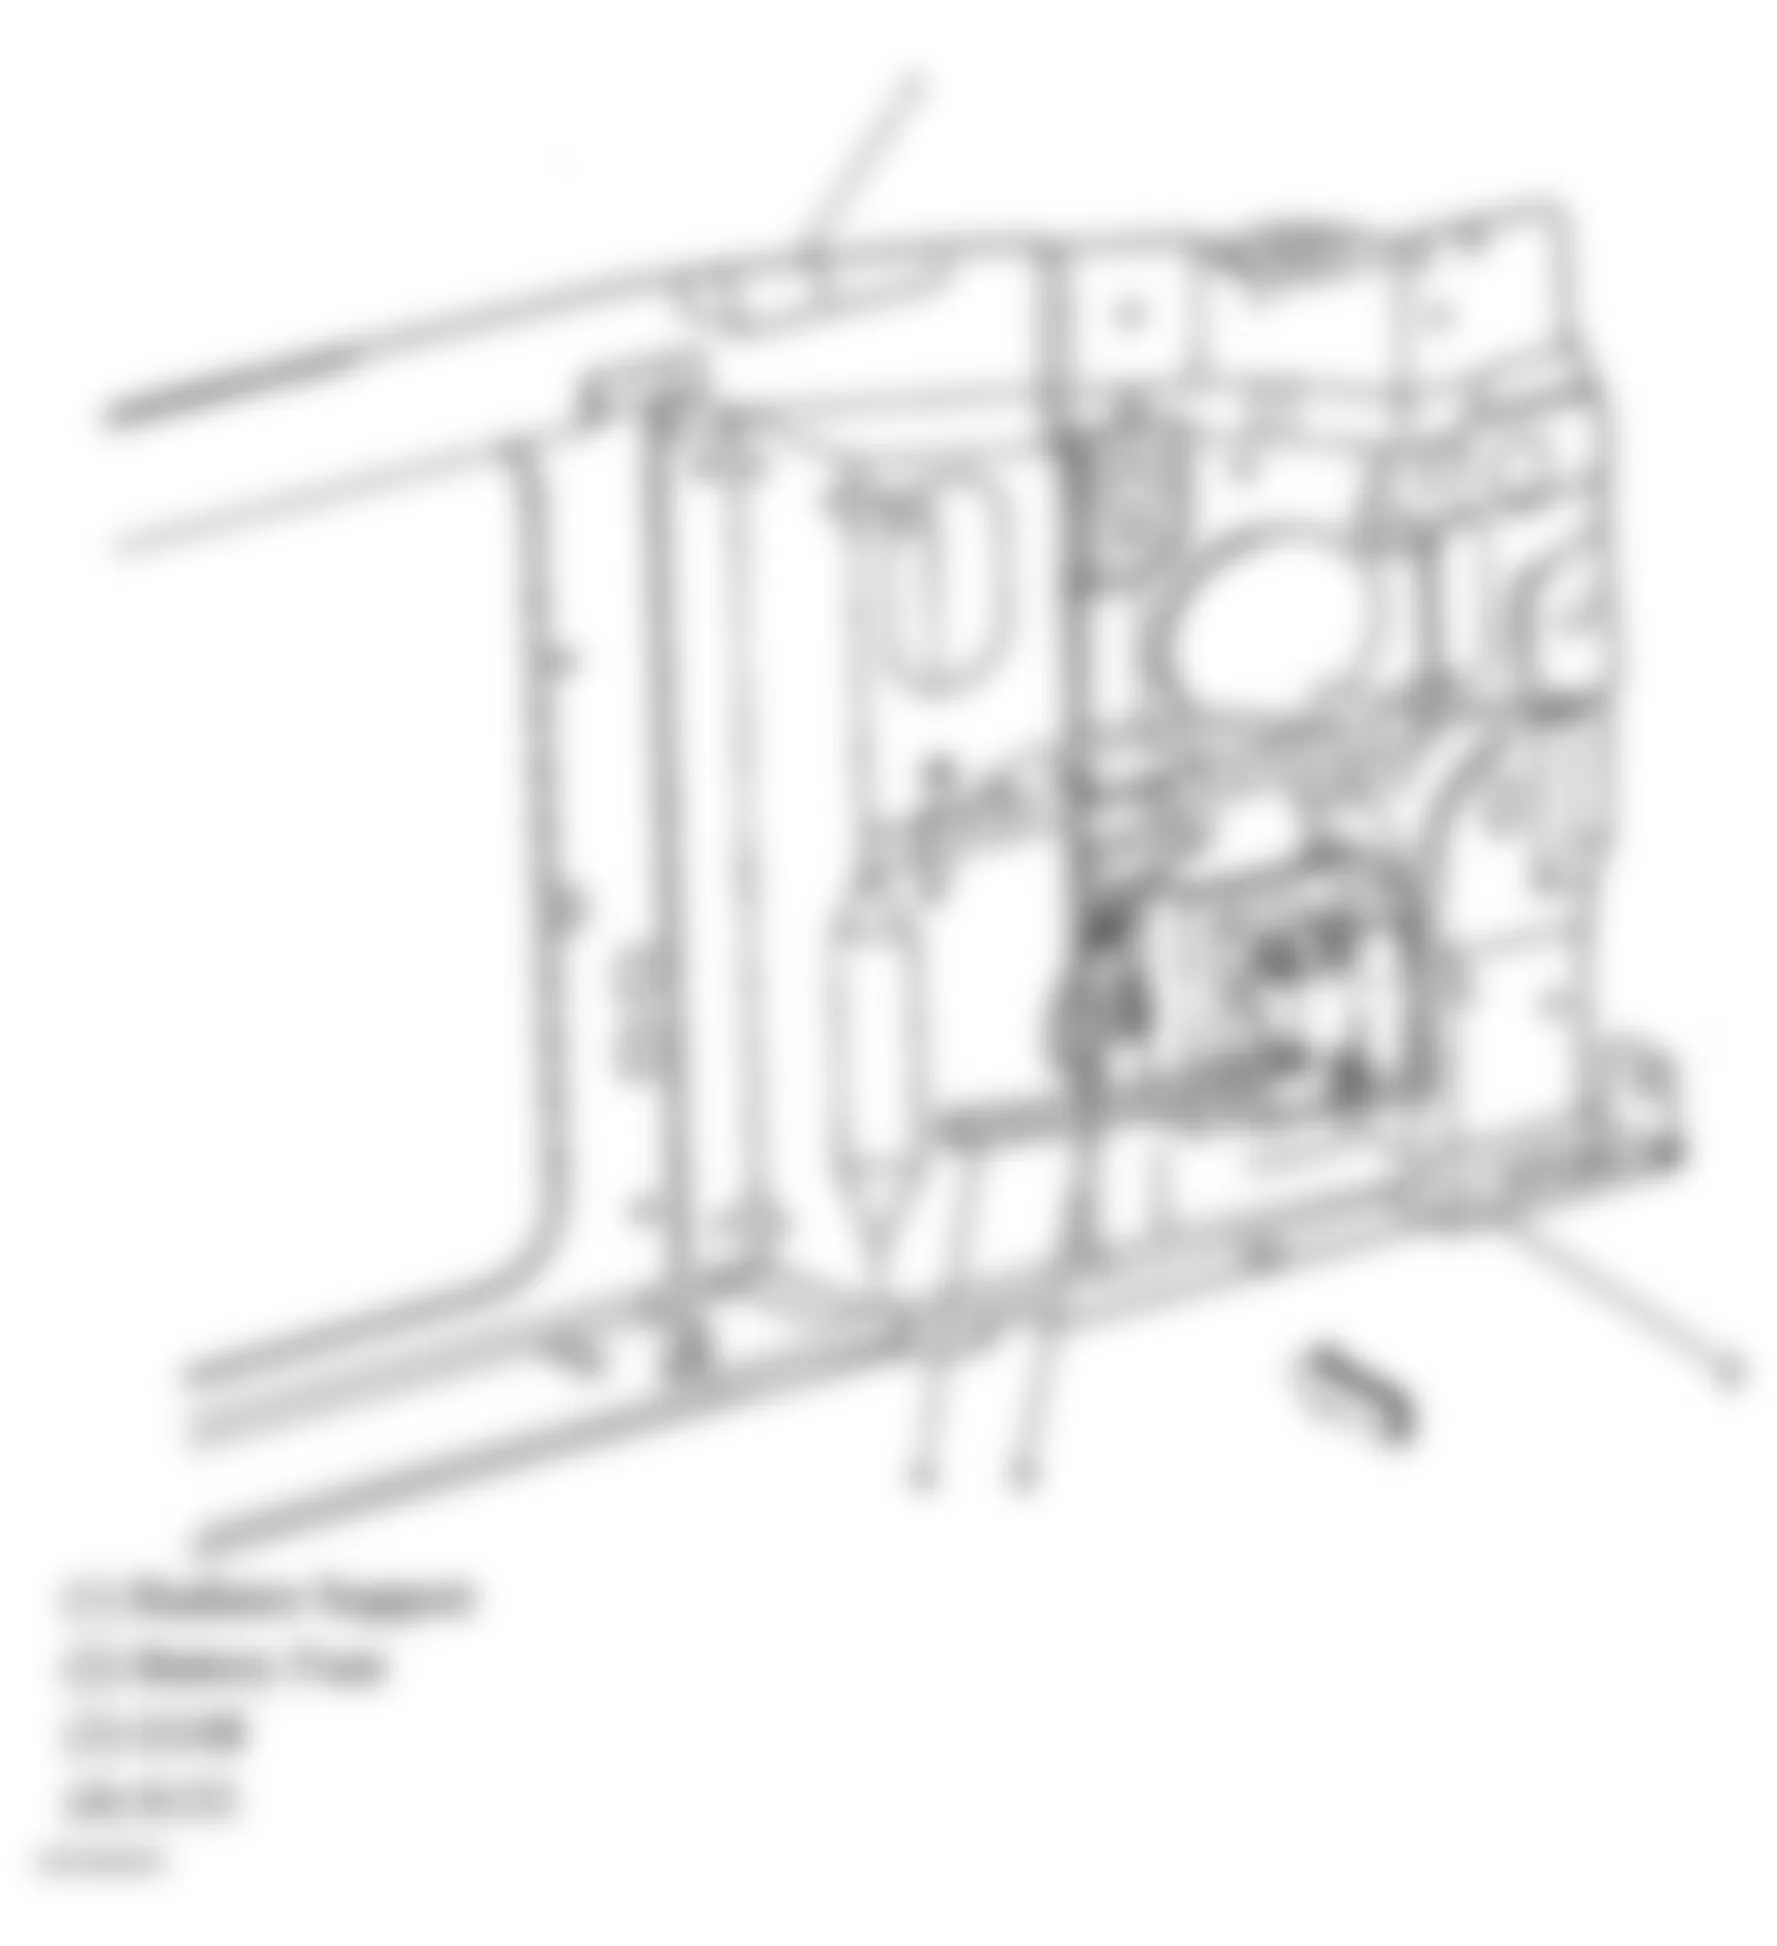 GMC Sonoma 2004 - Component Locations -  Front Radiator Support